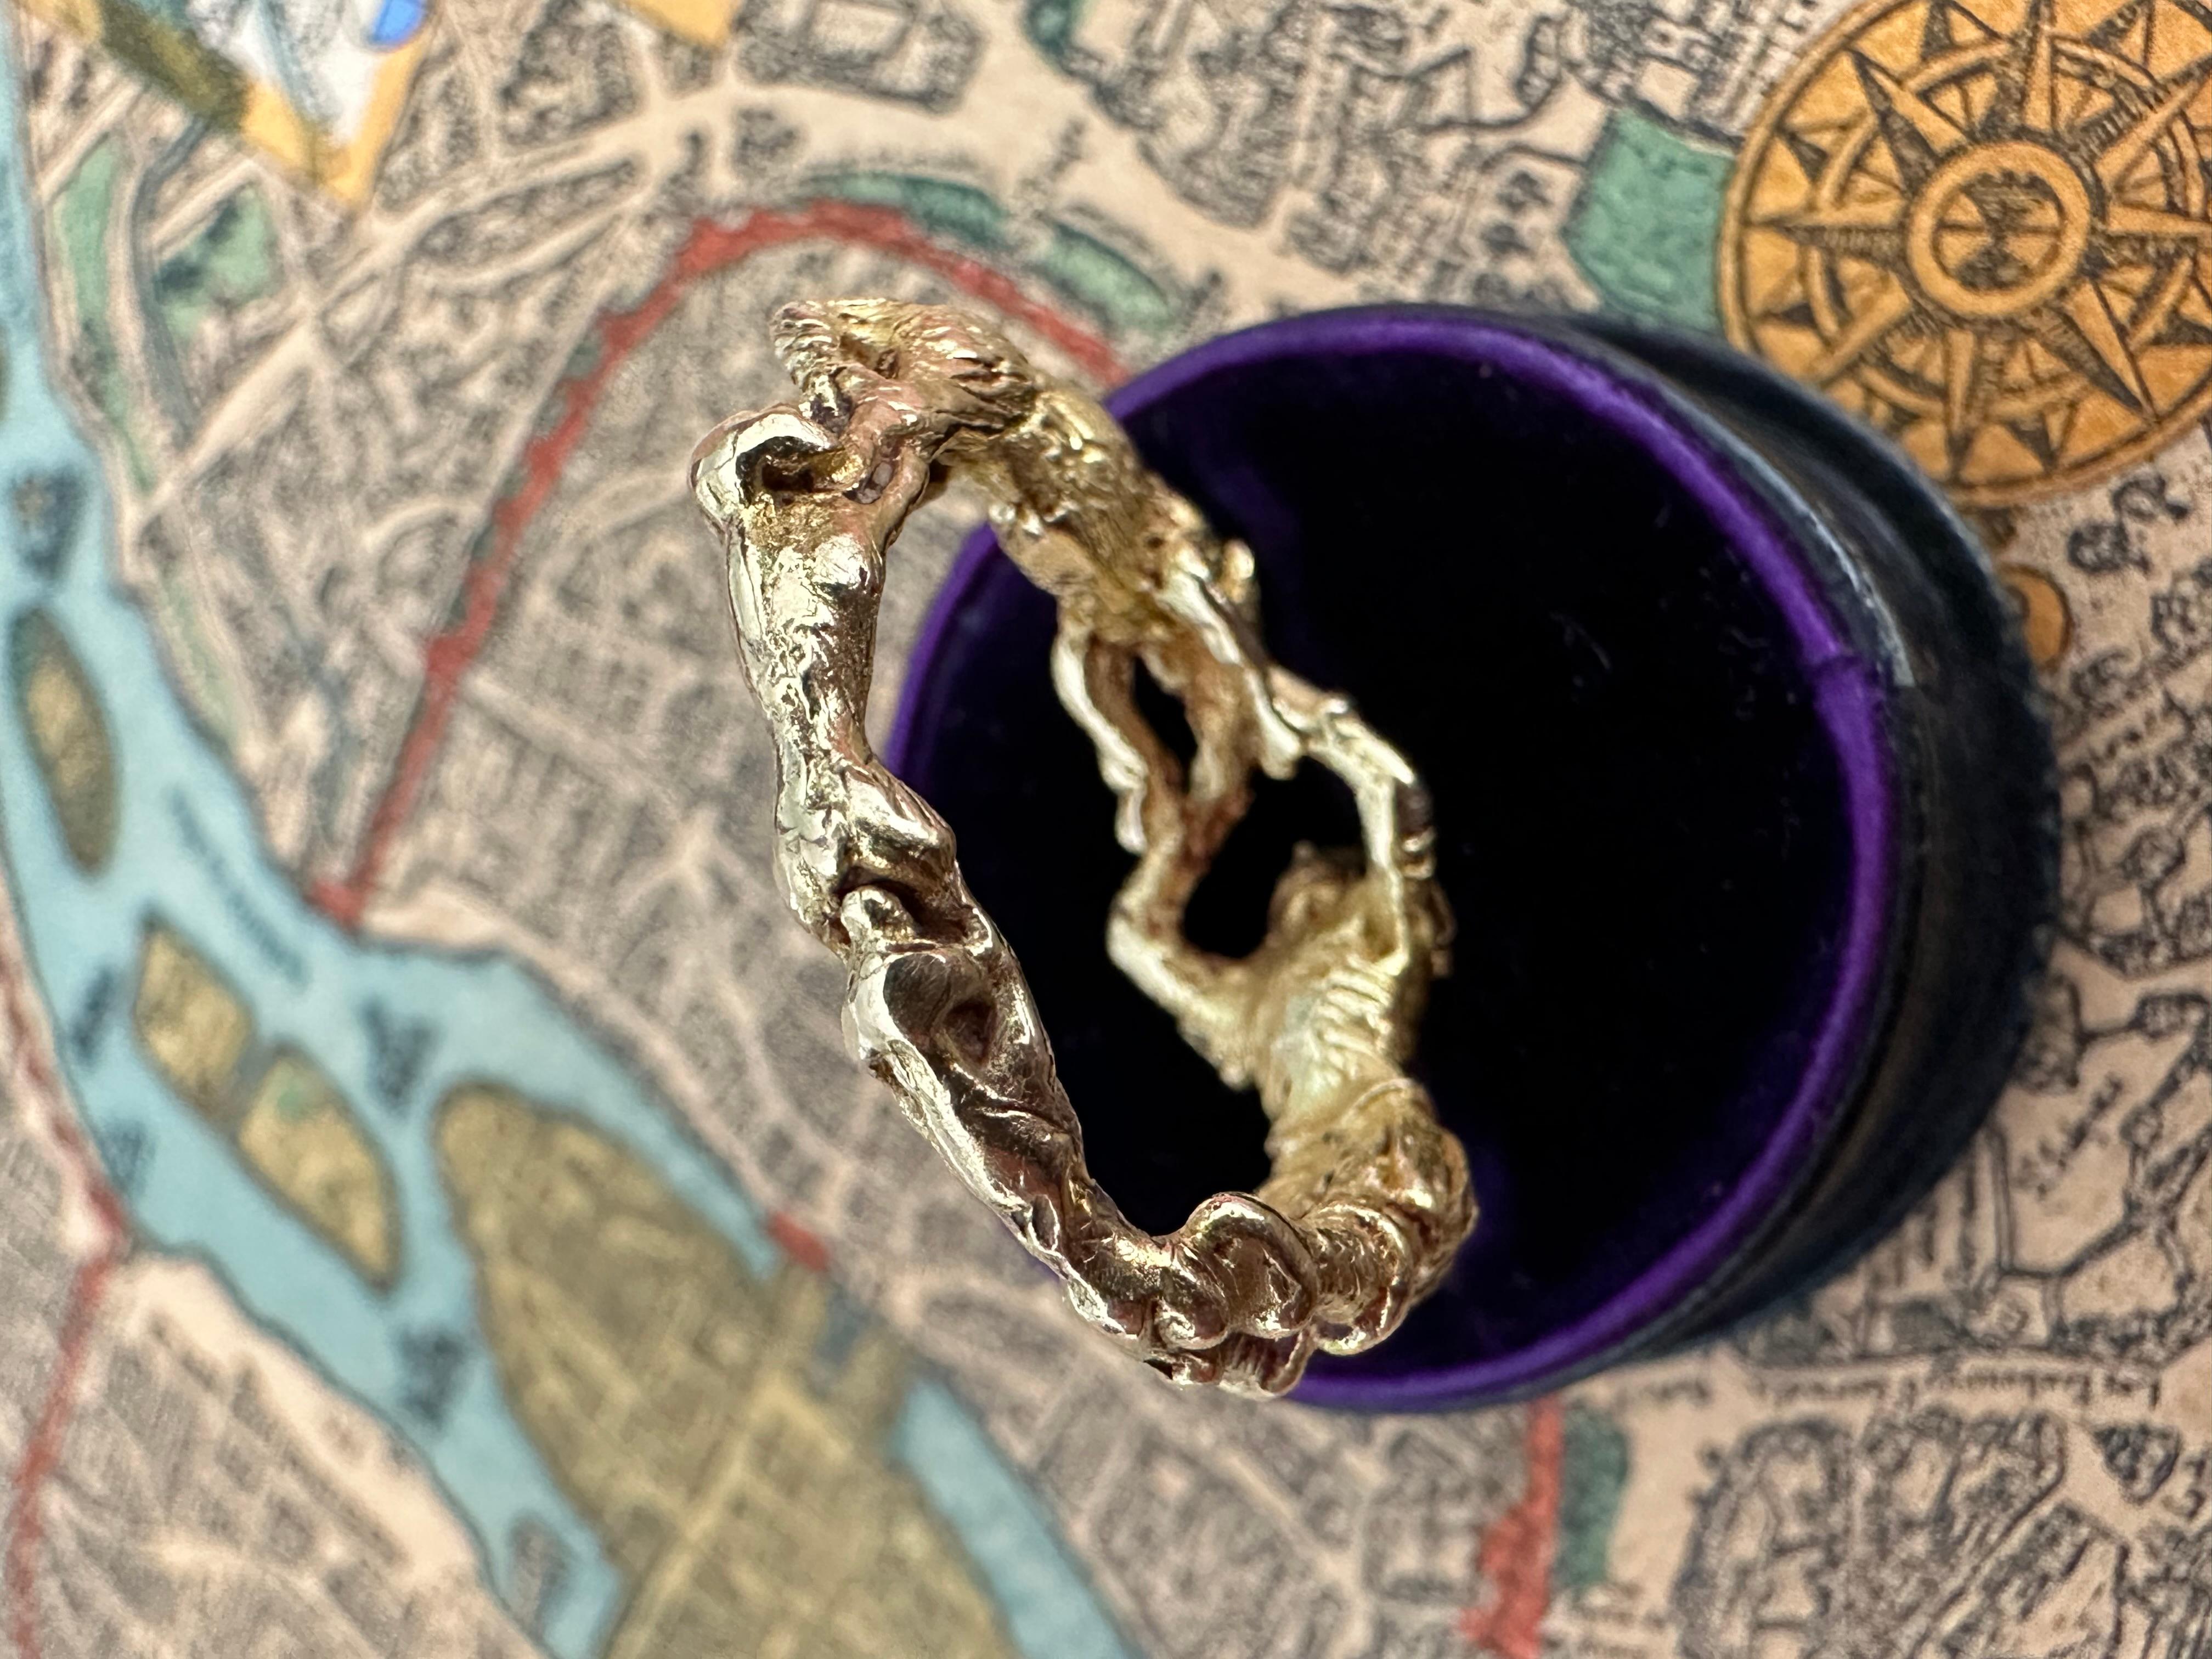 From the pages of “Rings: the Alice and Louis Koch collection.” The ring seen here is a faithful reproduction of a German renaissance ring depicting a hunter and boar locked in heated combat. As the story goes, Louis Koch made a replica of the